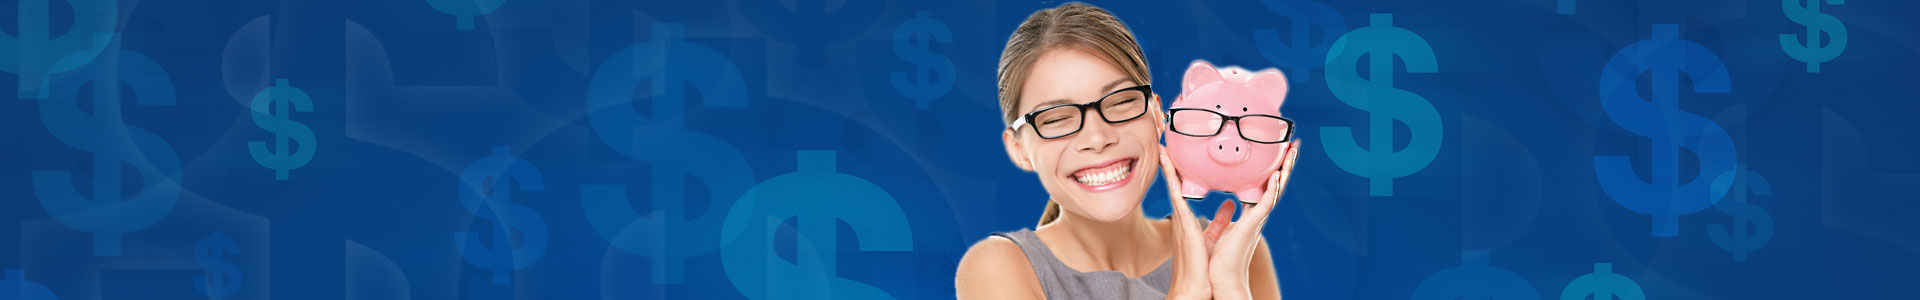 woman smiling holding piggy bank